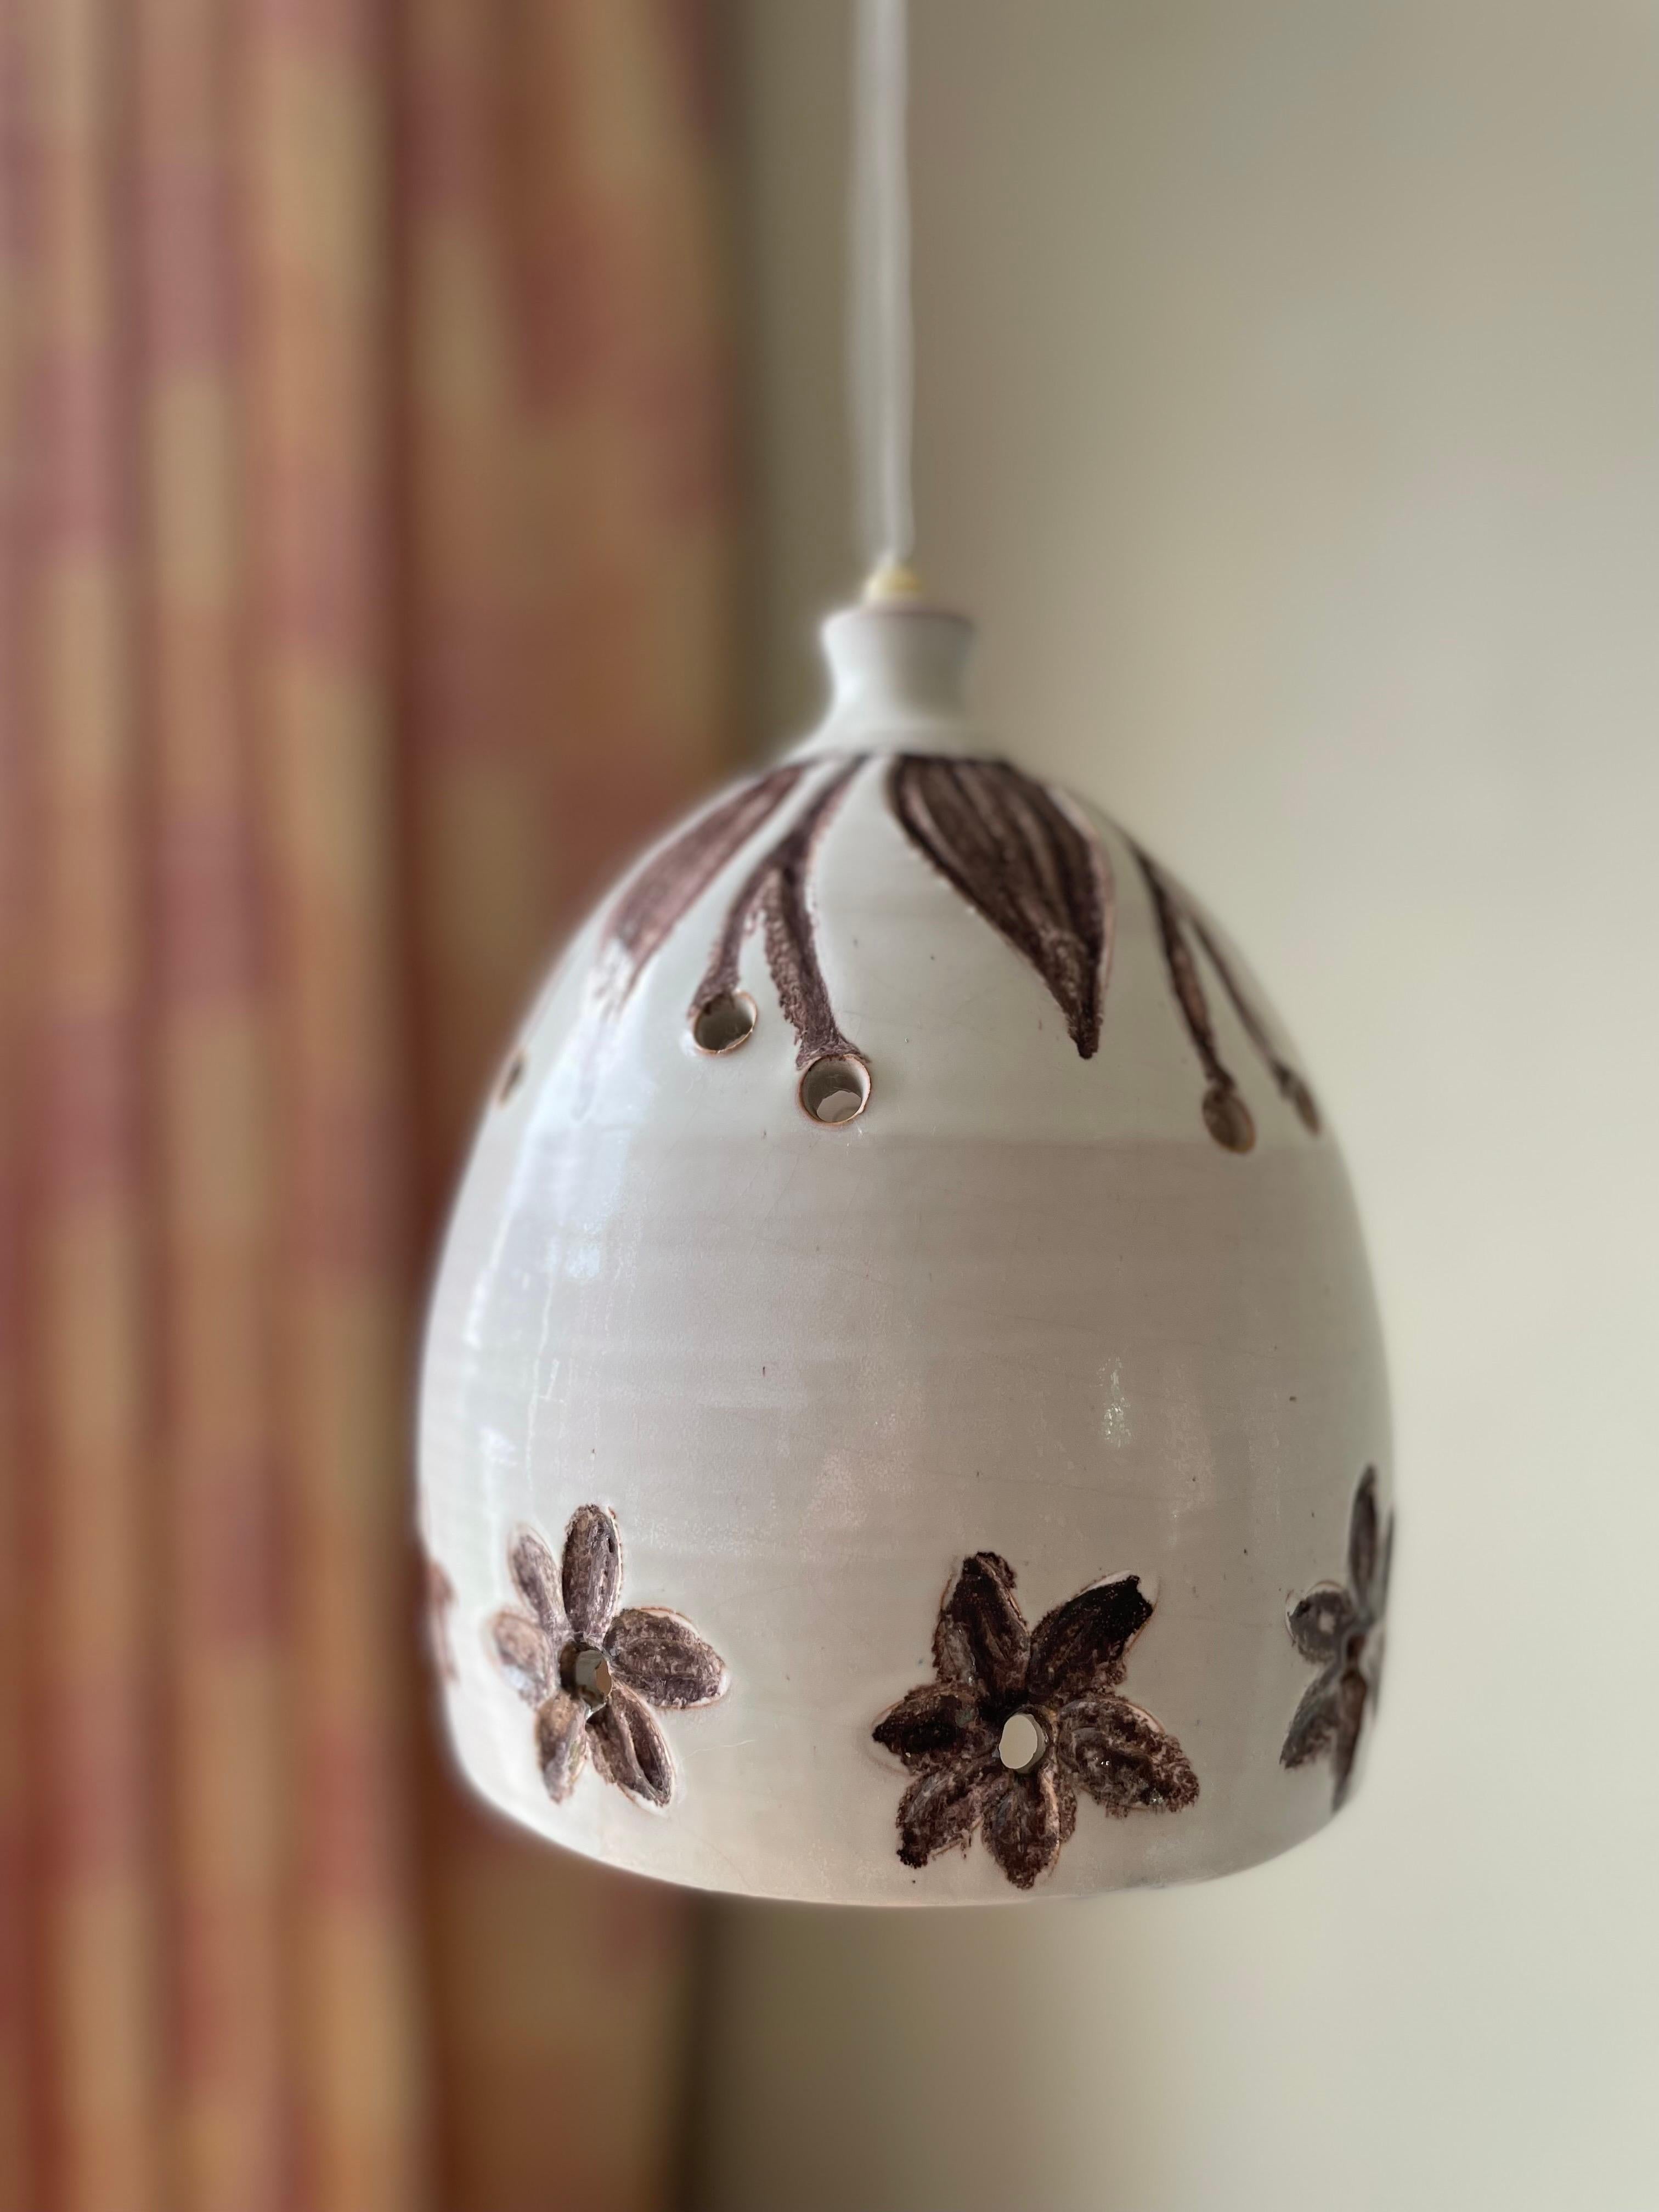 Shiny white glazed handmade organic midcentury modern pendant with hand-carved and hand-painted brown floral relief decor. Circular perforations along the top and bottom to let the light out. Shiny white glaze on the inside, raw bottom edge.